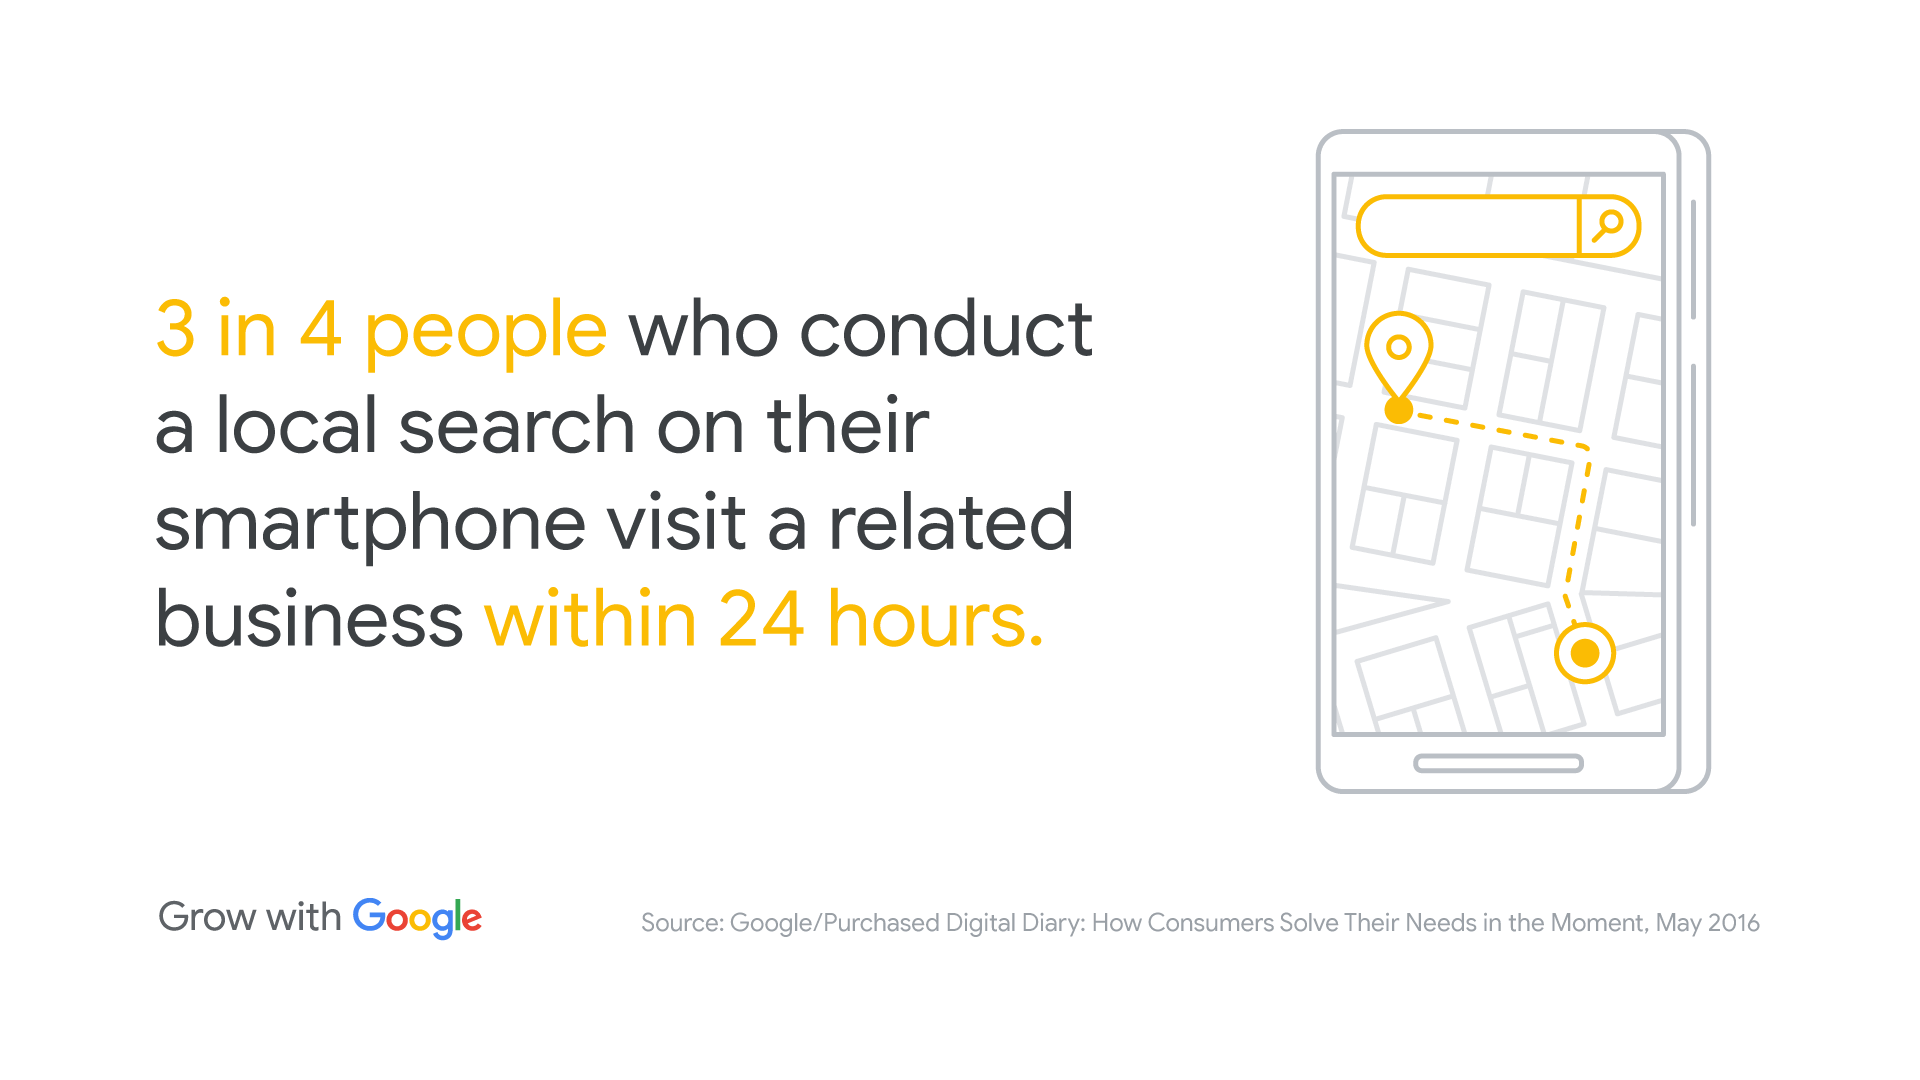 Google Partners statistic with image of a map on a phone